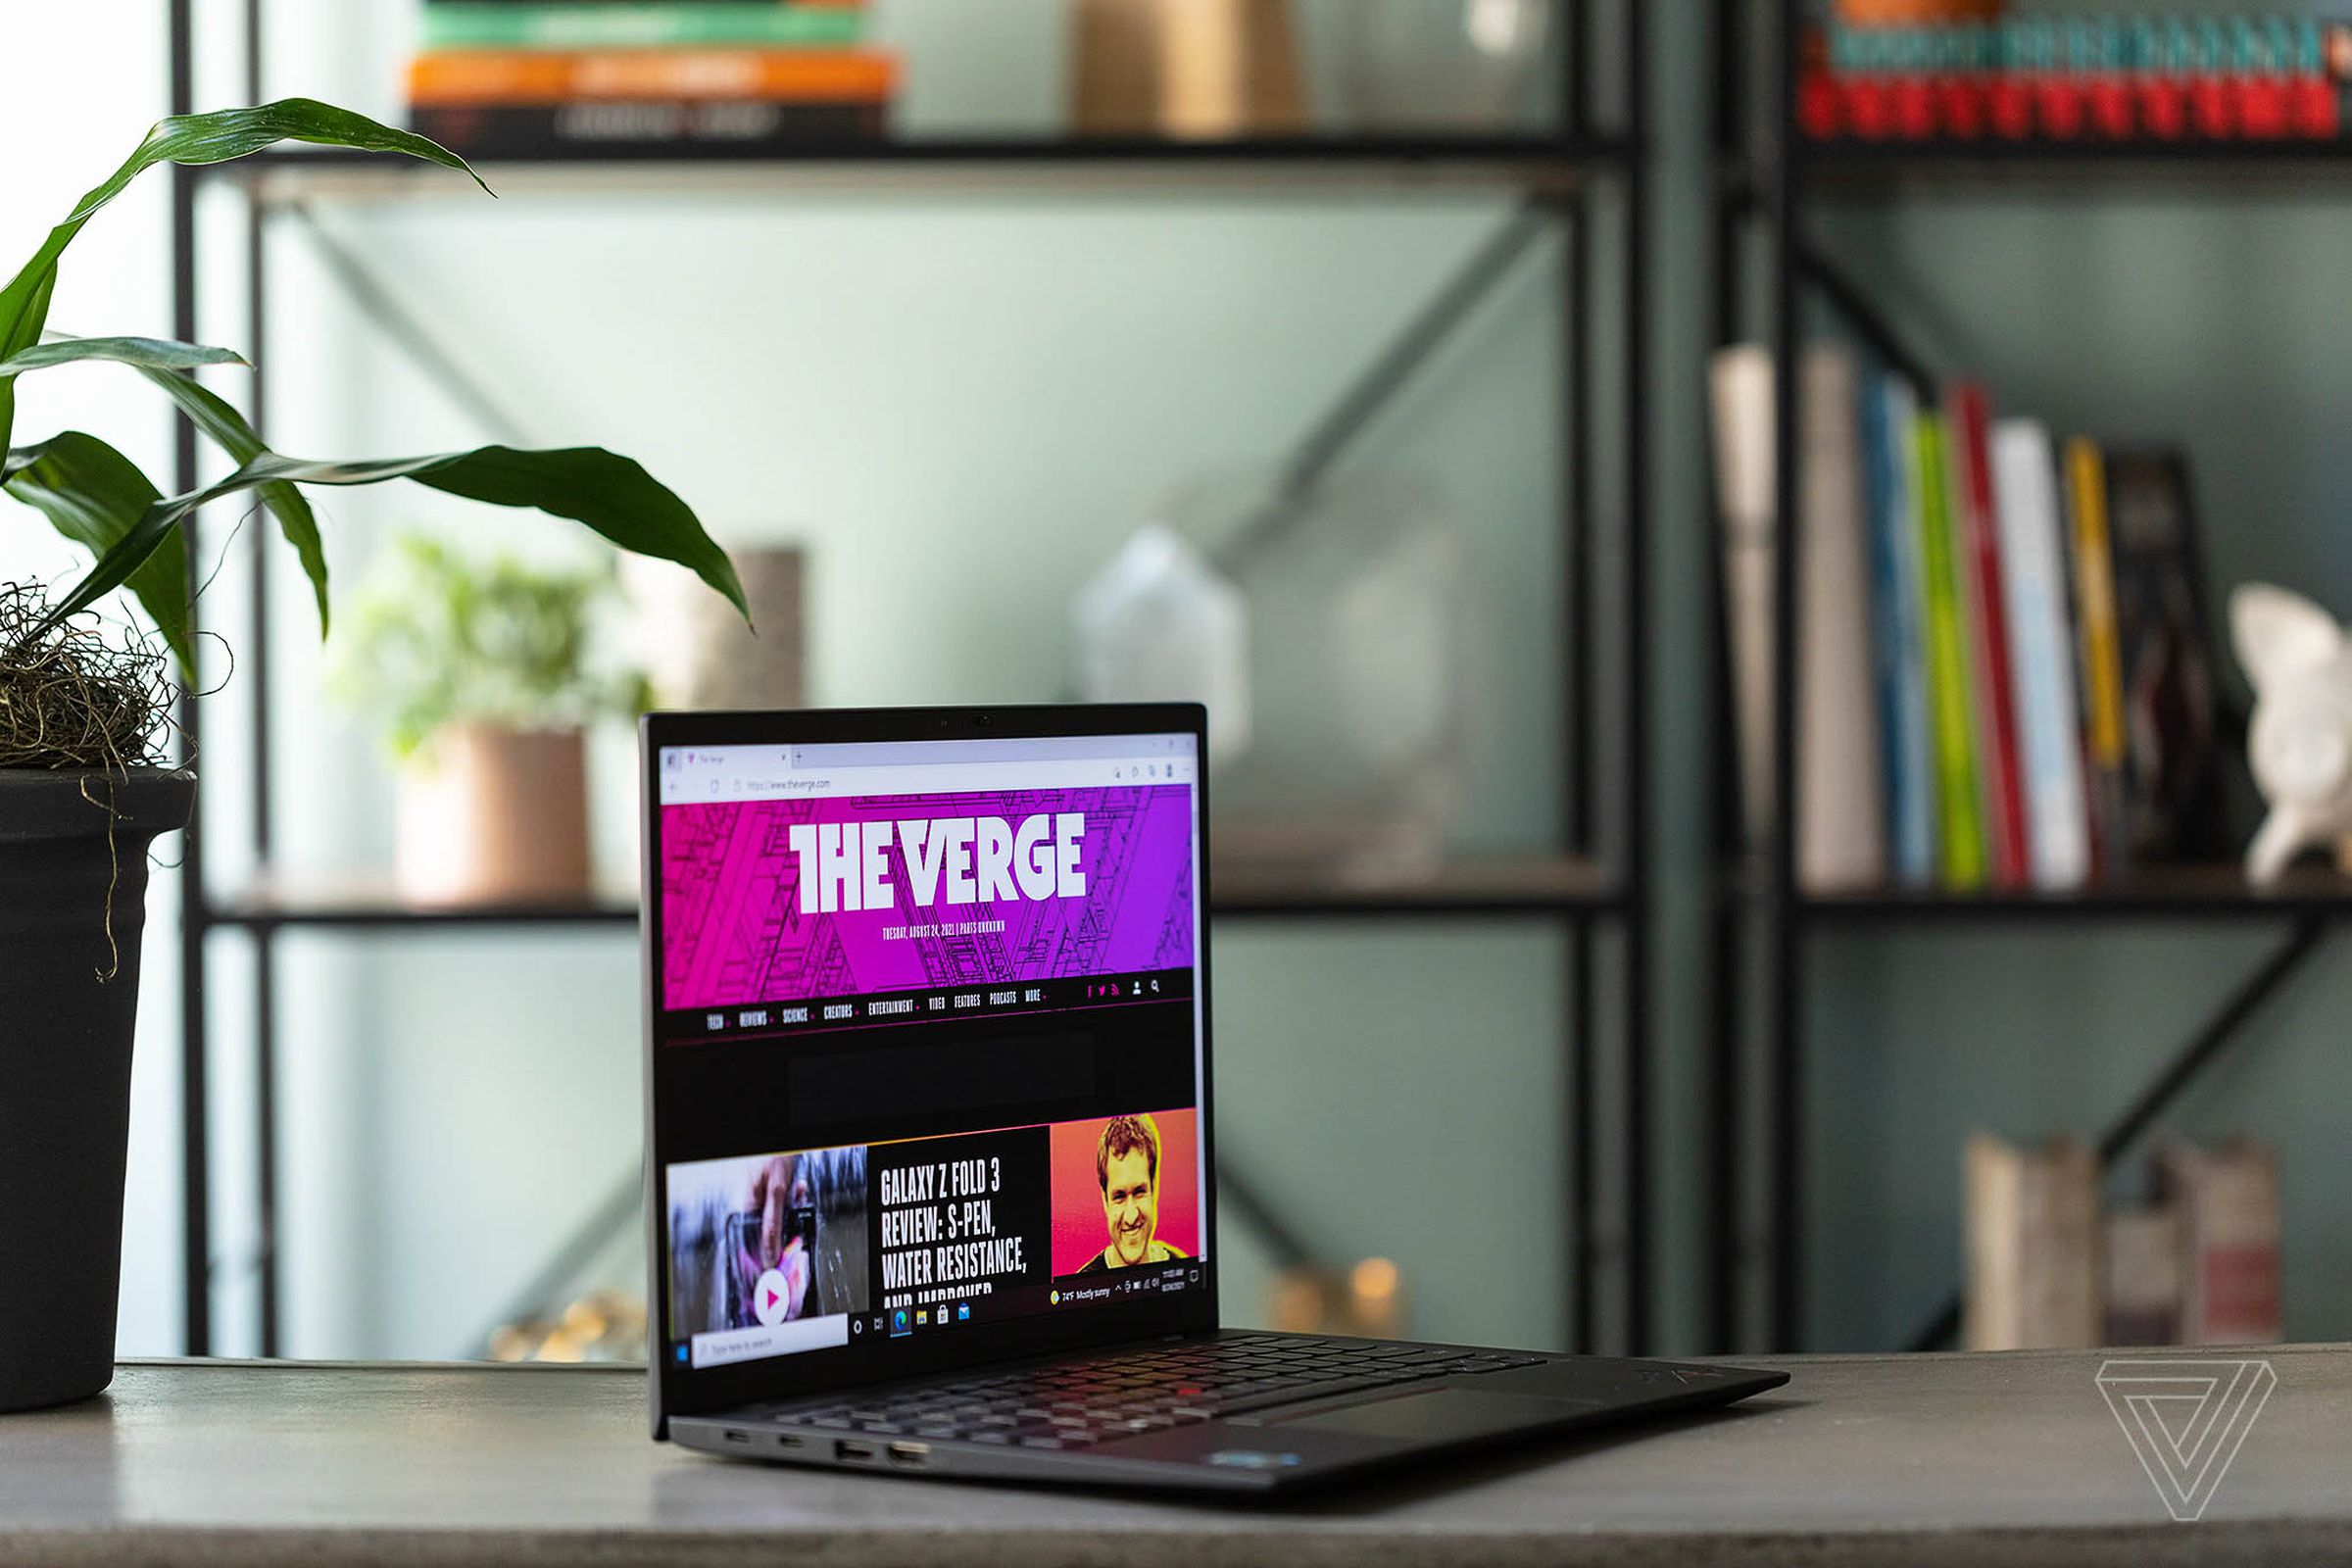 The Lenovo ThinkPad X1 Carbon gen 9 on a table open, angled to the right. The screen displays The Verge homepage. In the background is a bookshelf with potted plants and books.